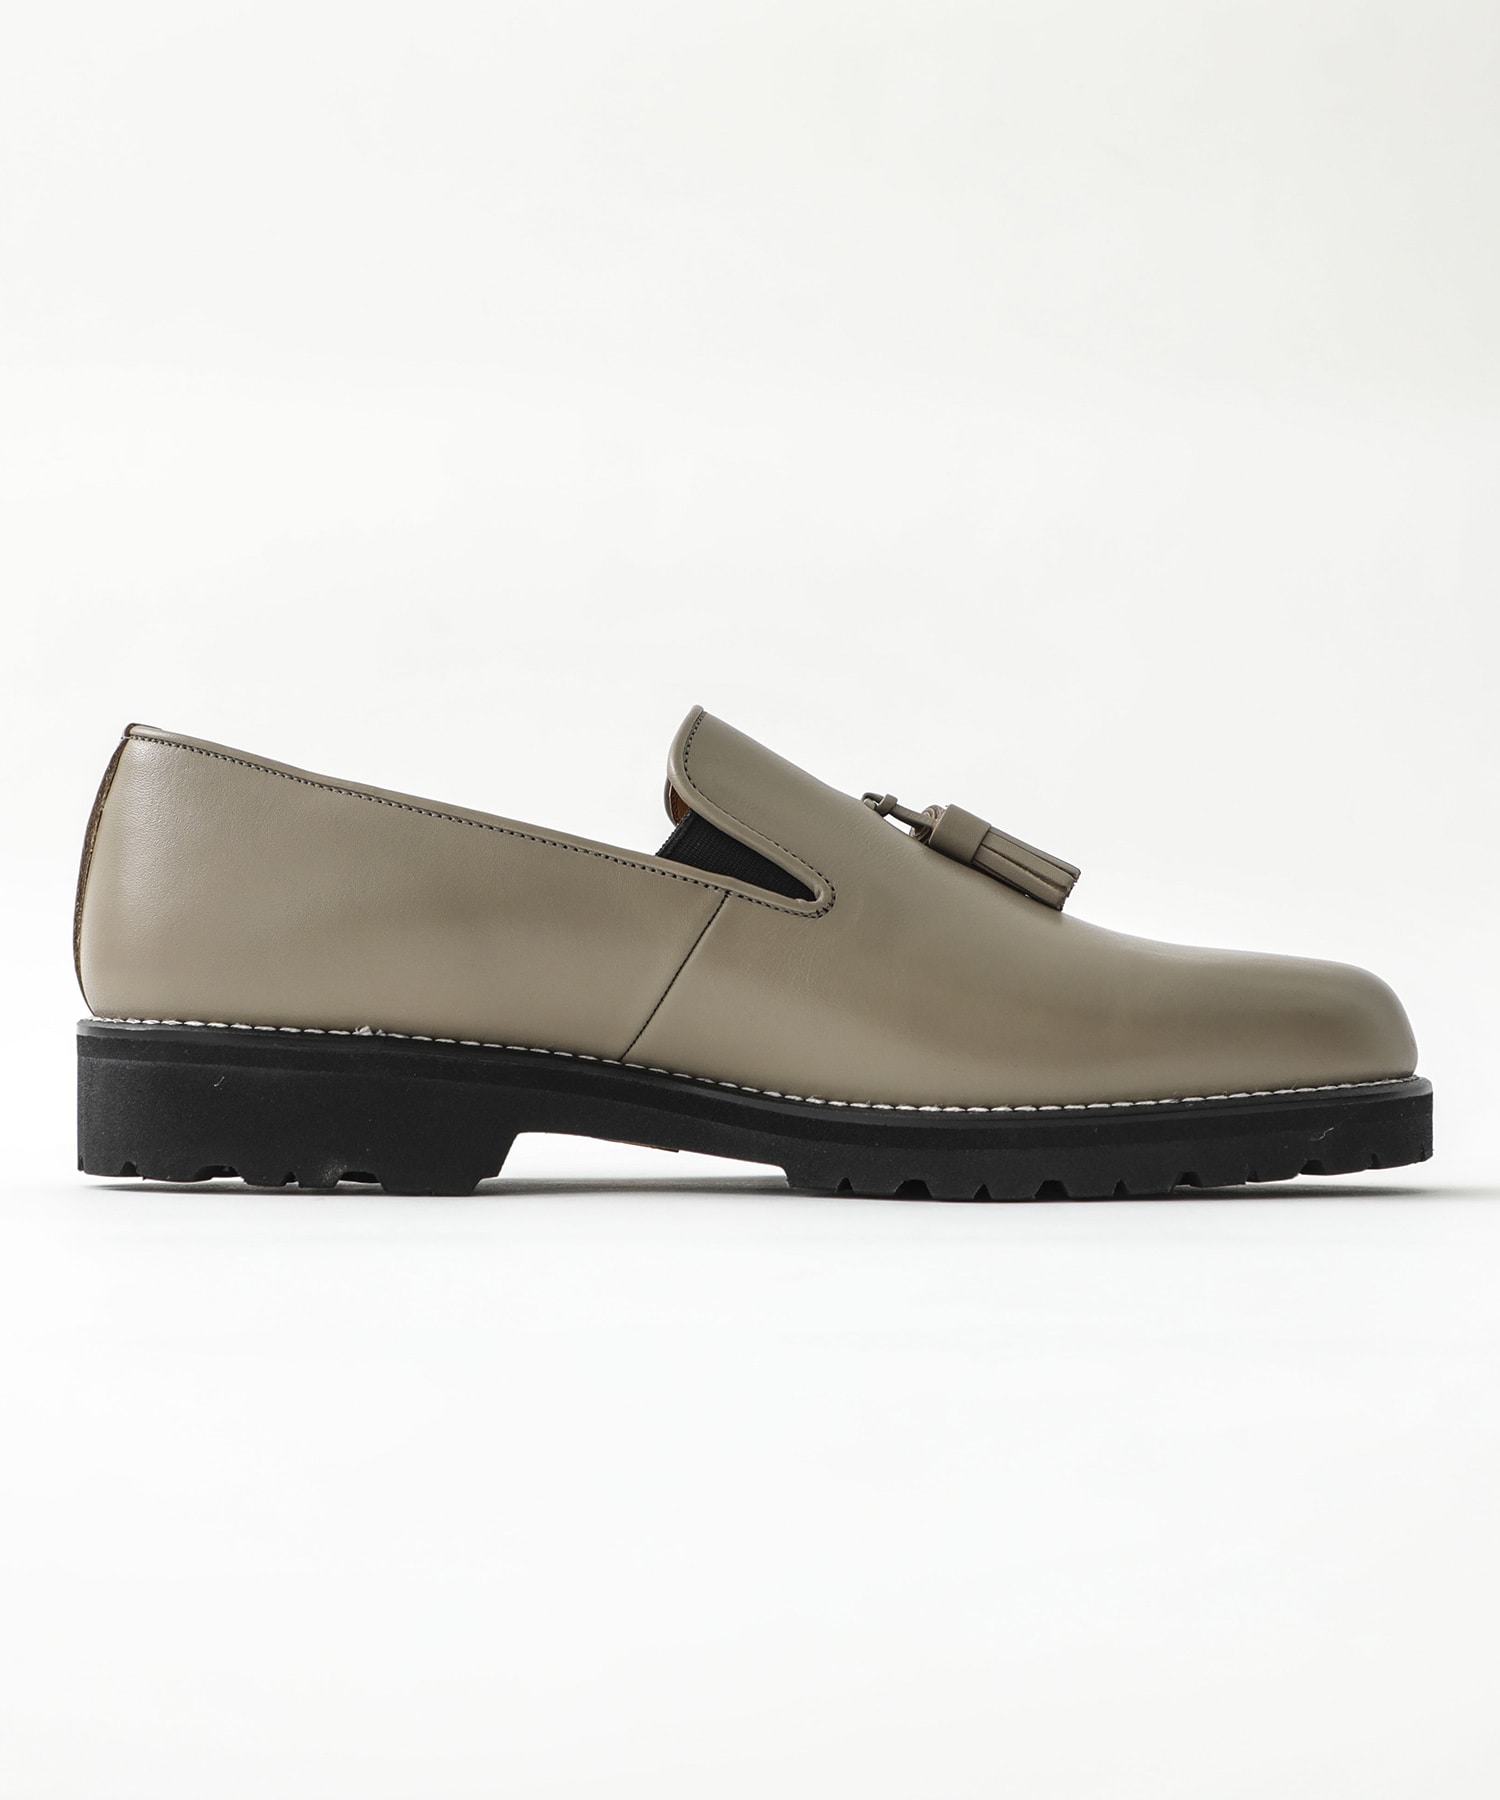 Tussel Cock Shoes | Tomo & Co.